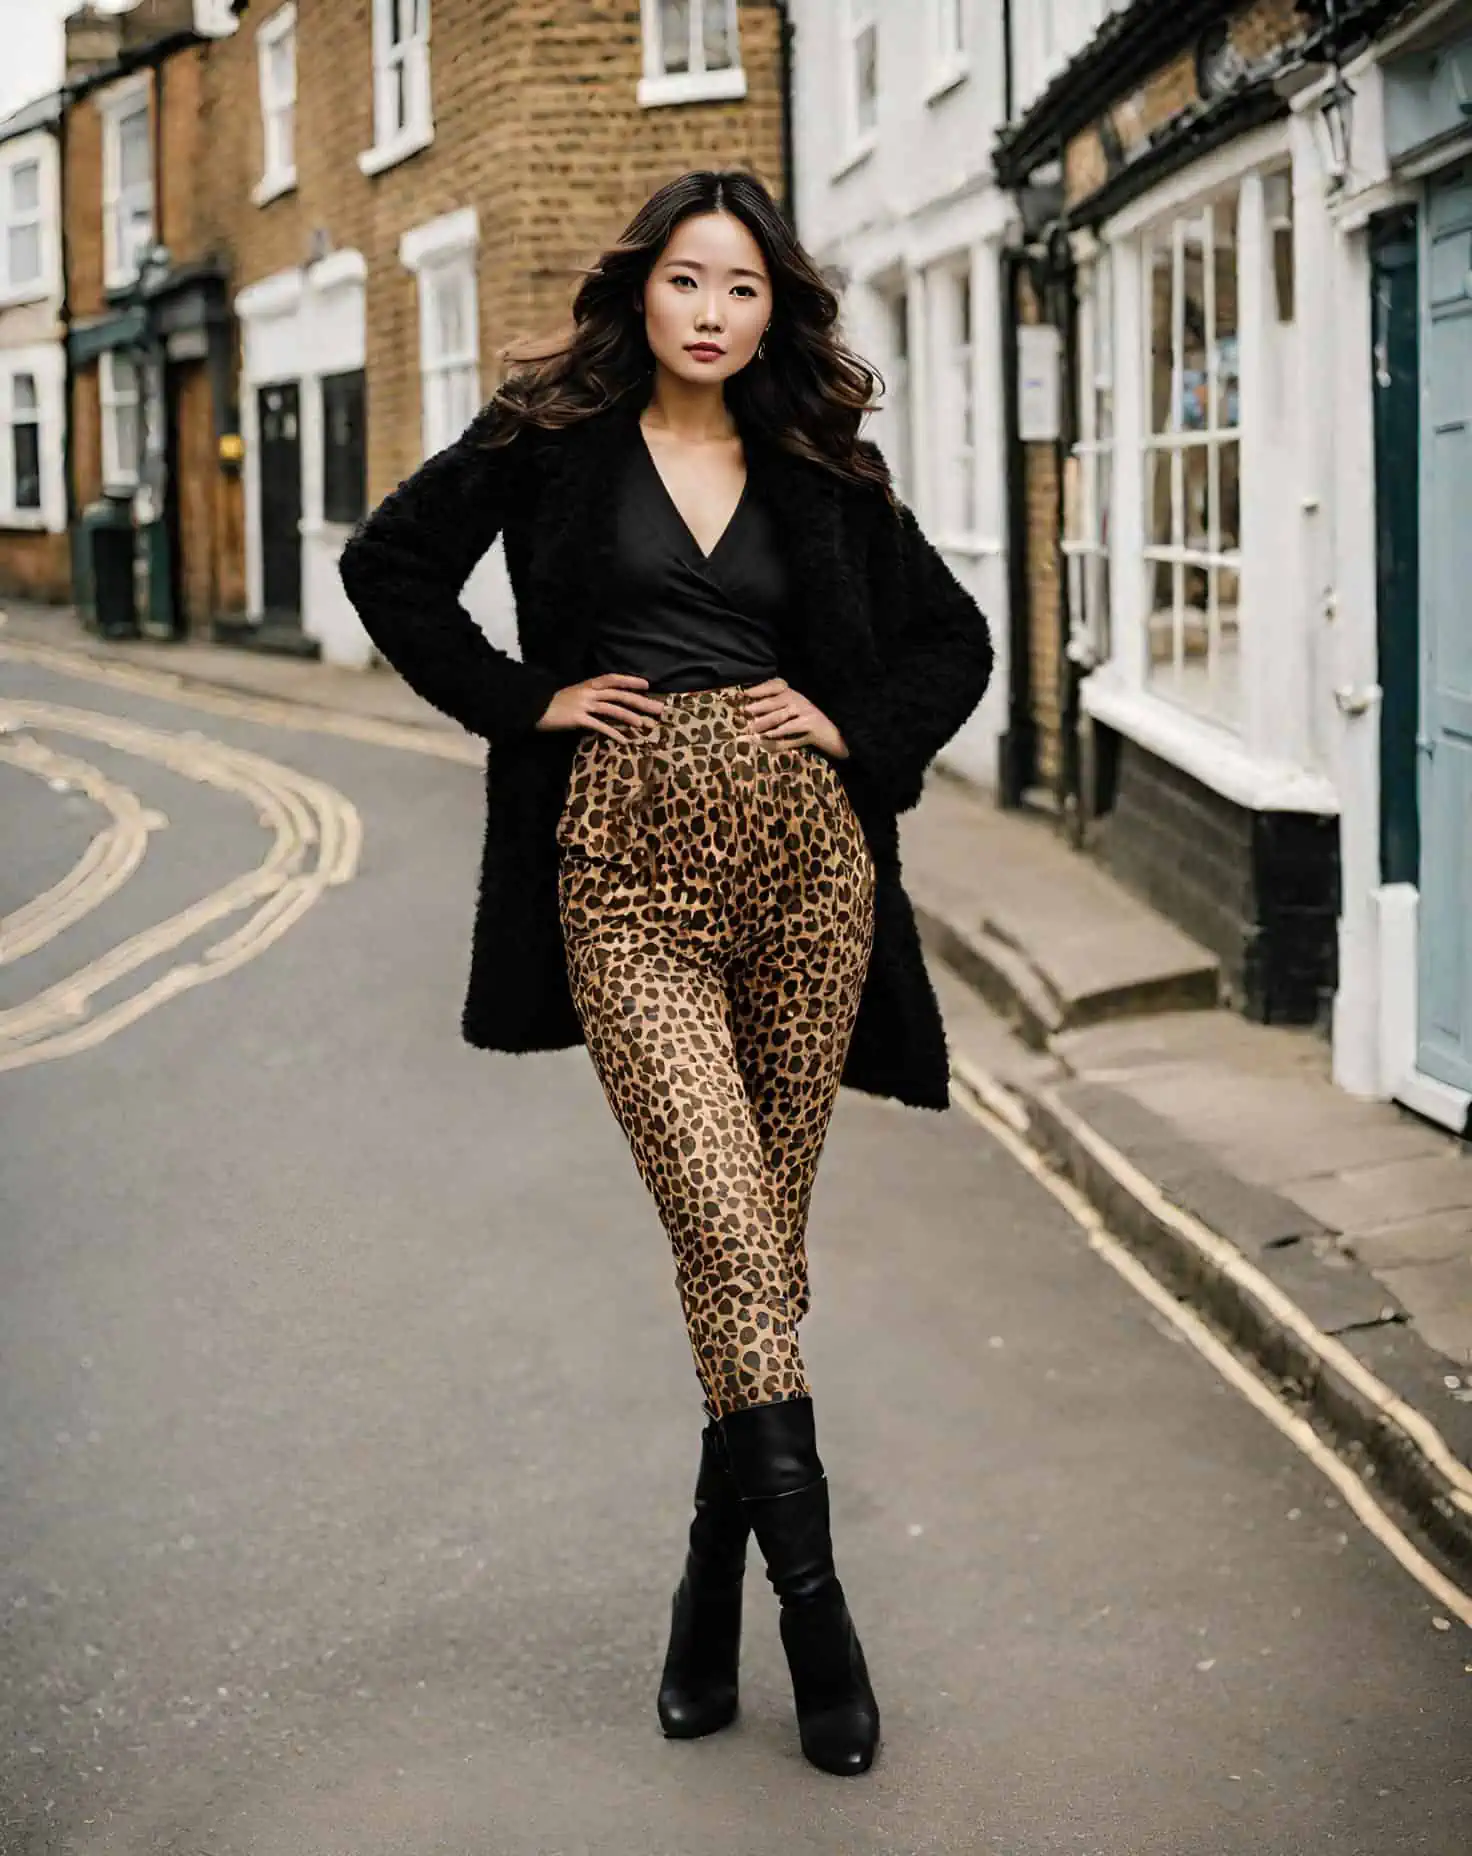 https://blog.petitedressing.com/wp-content/uploads/2021/01/Leopard-pants-with-a-black-wrapped-top-layered-with-black-cardigan.webp